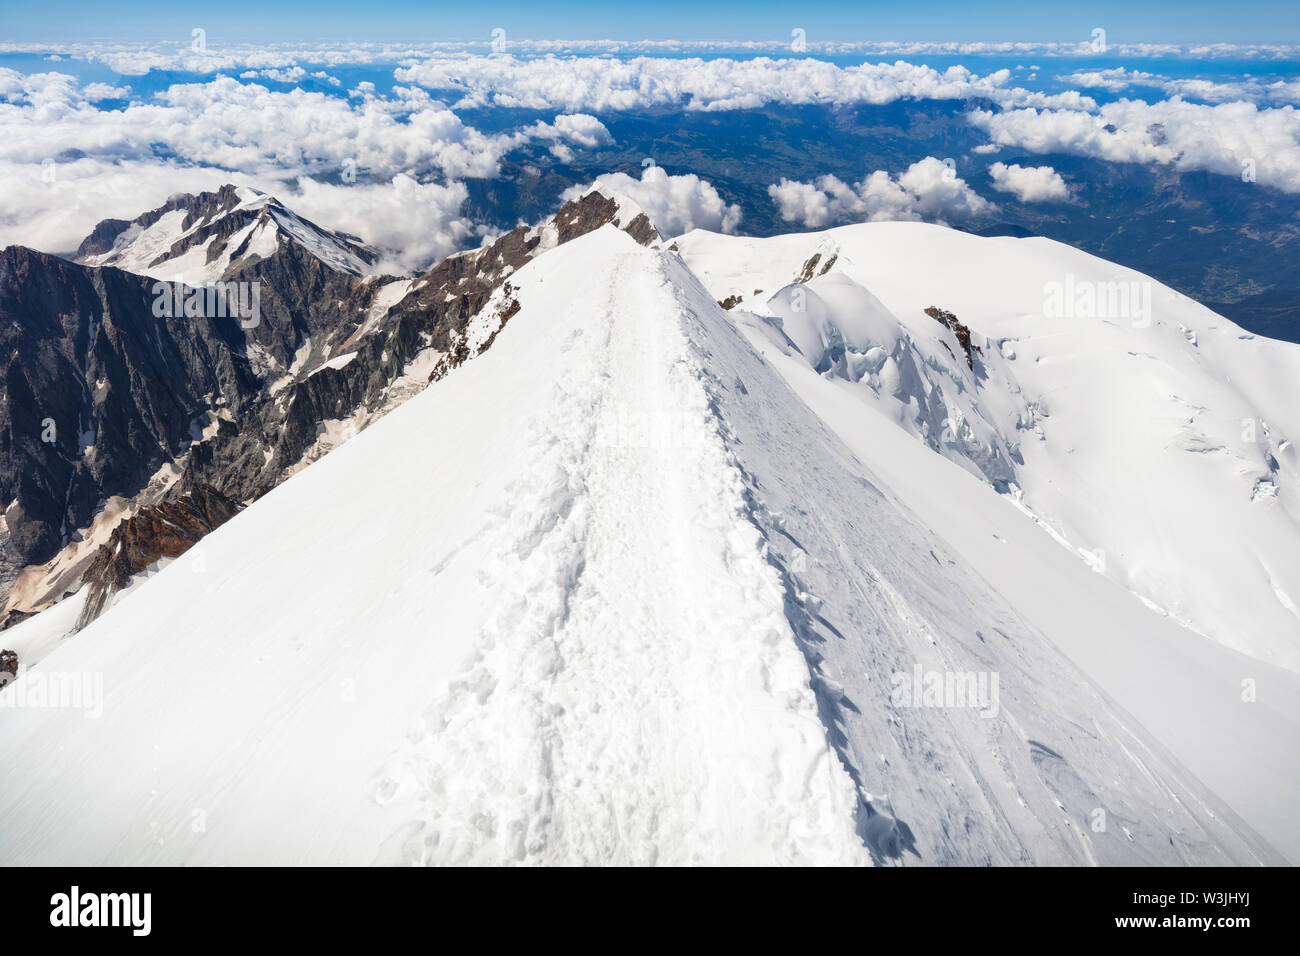 Trekking to the top of Mont Blanc mountain in French Alps Stock Photo